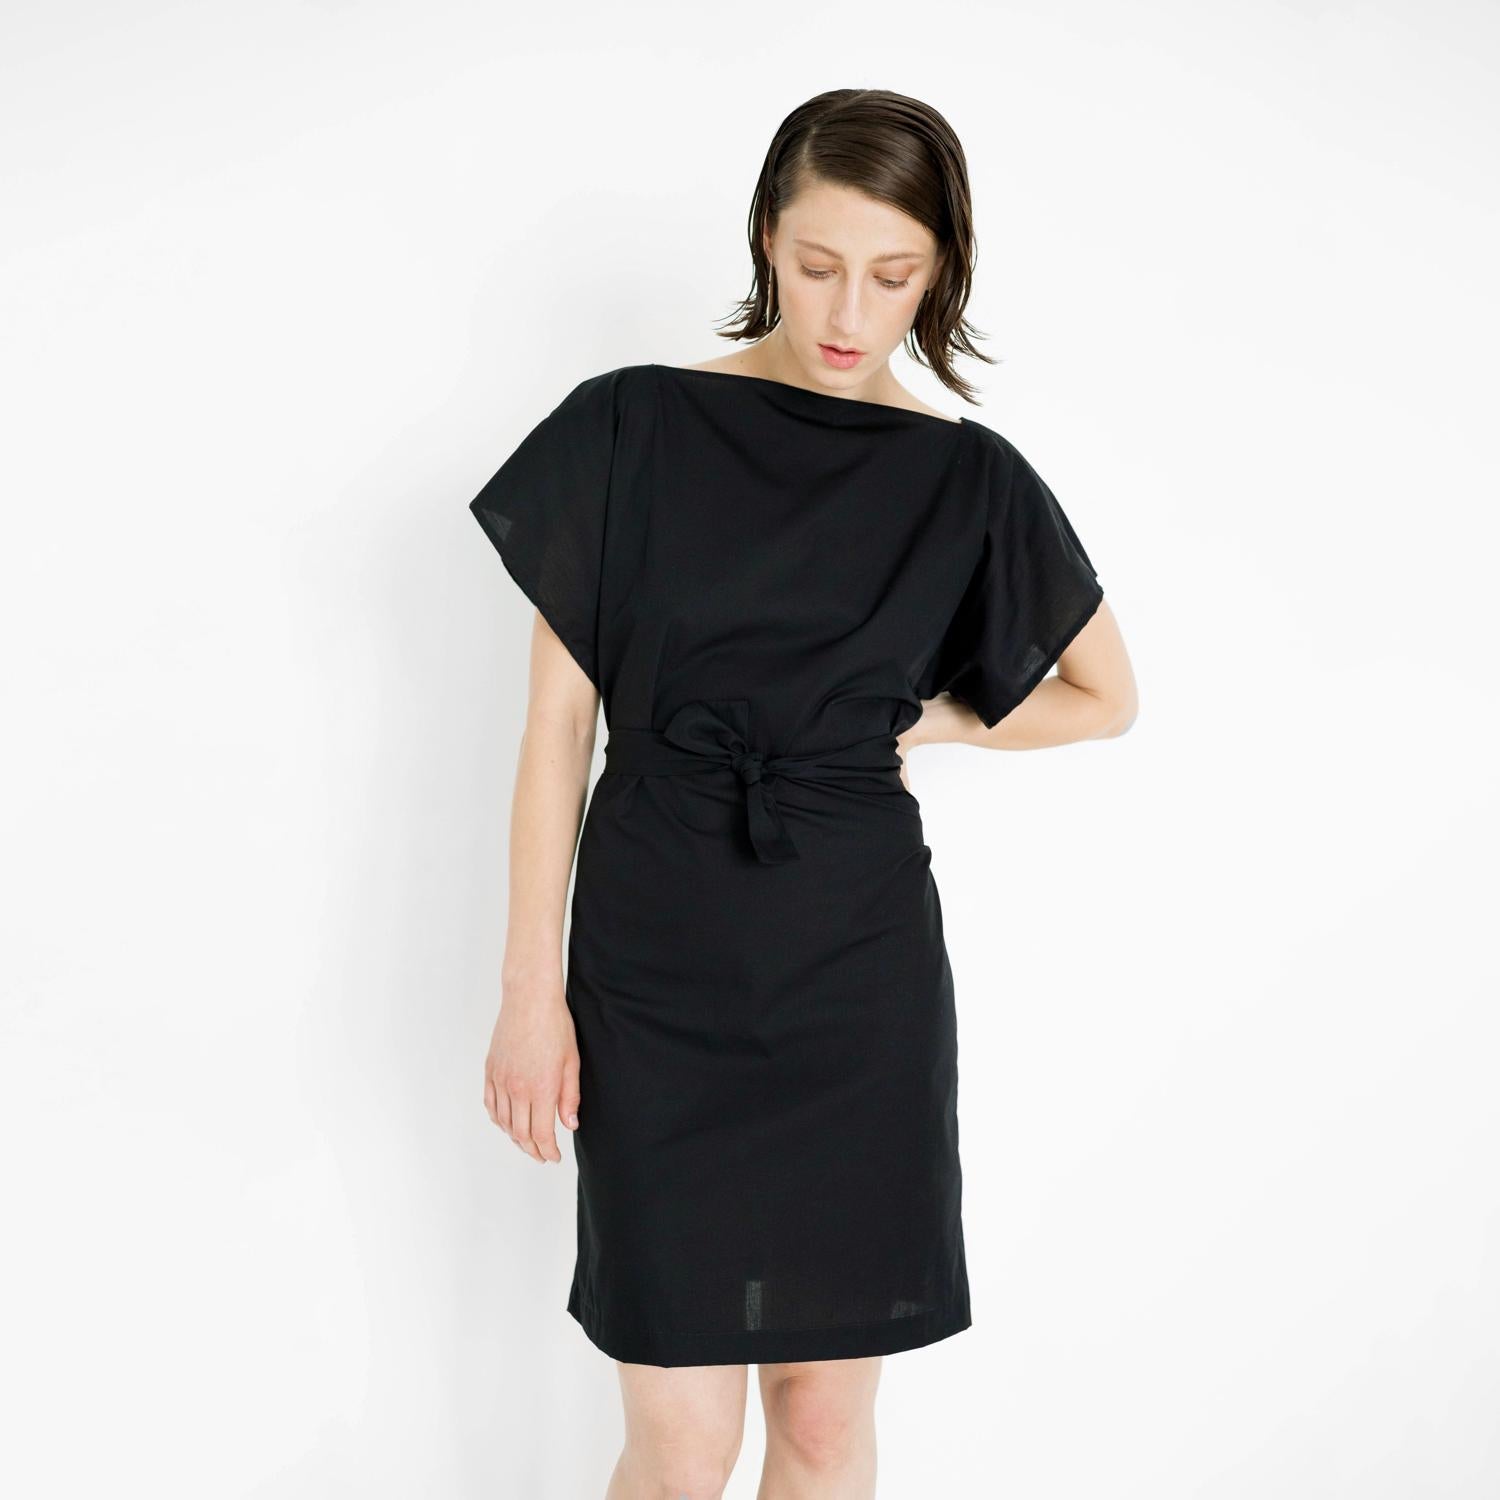 Light summer dress in black made from organic cotton